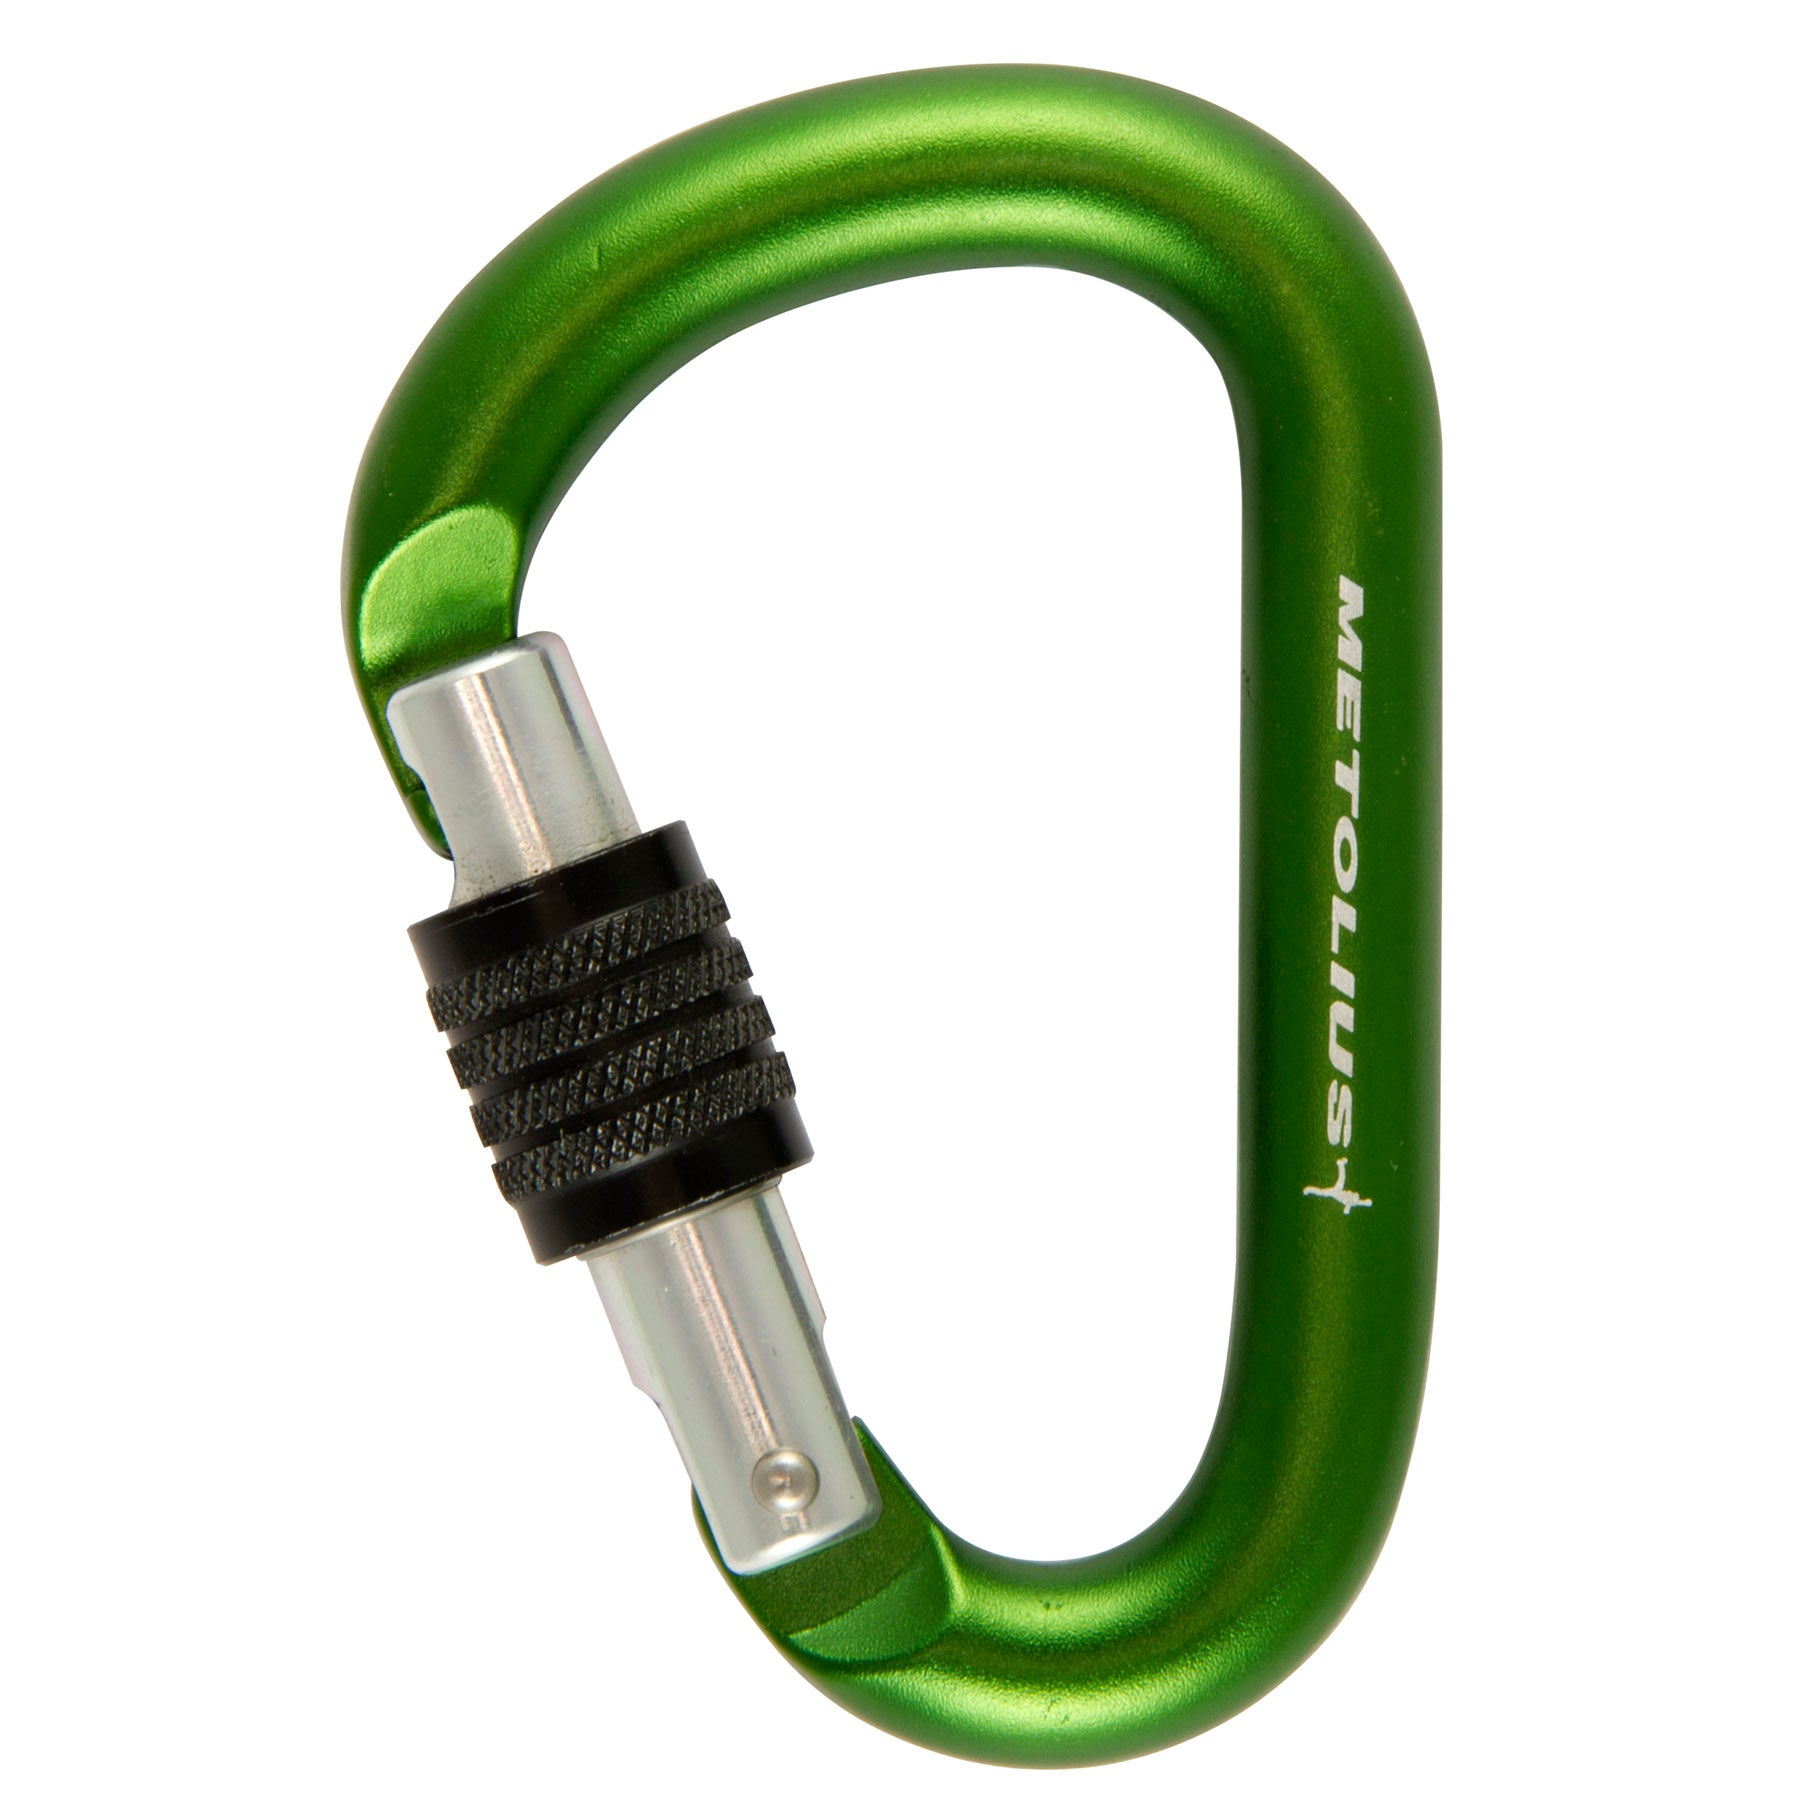 a photo of the metolius element key lock carabiner, in green